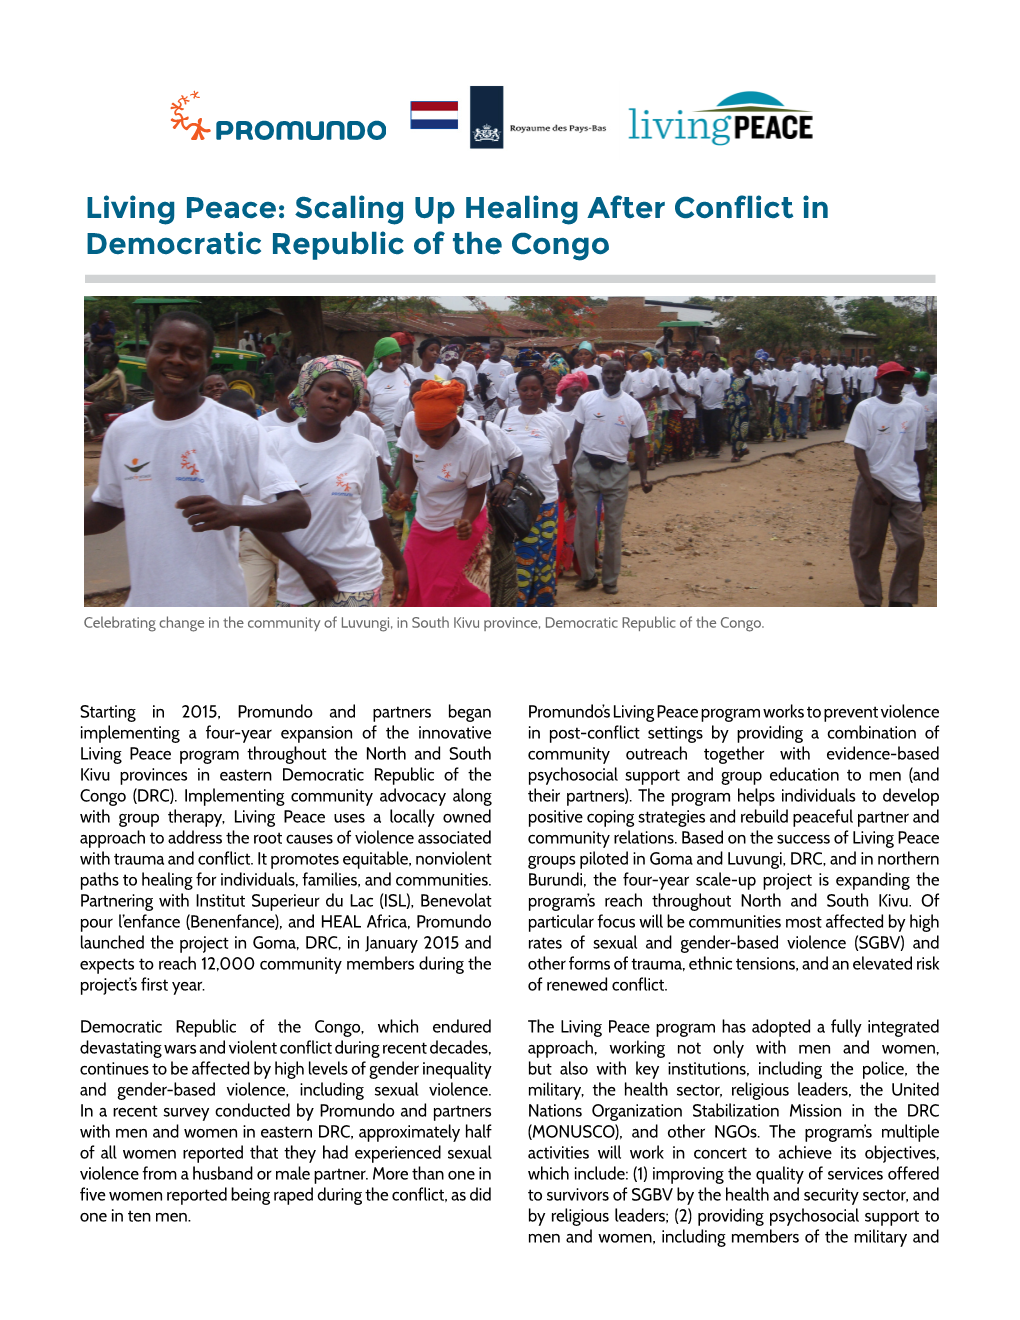 Living Peace: Scaling up Healing After Conflict in Democratic Republic of the Congo